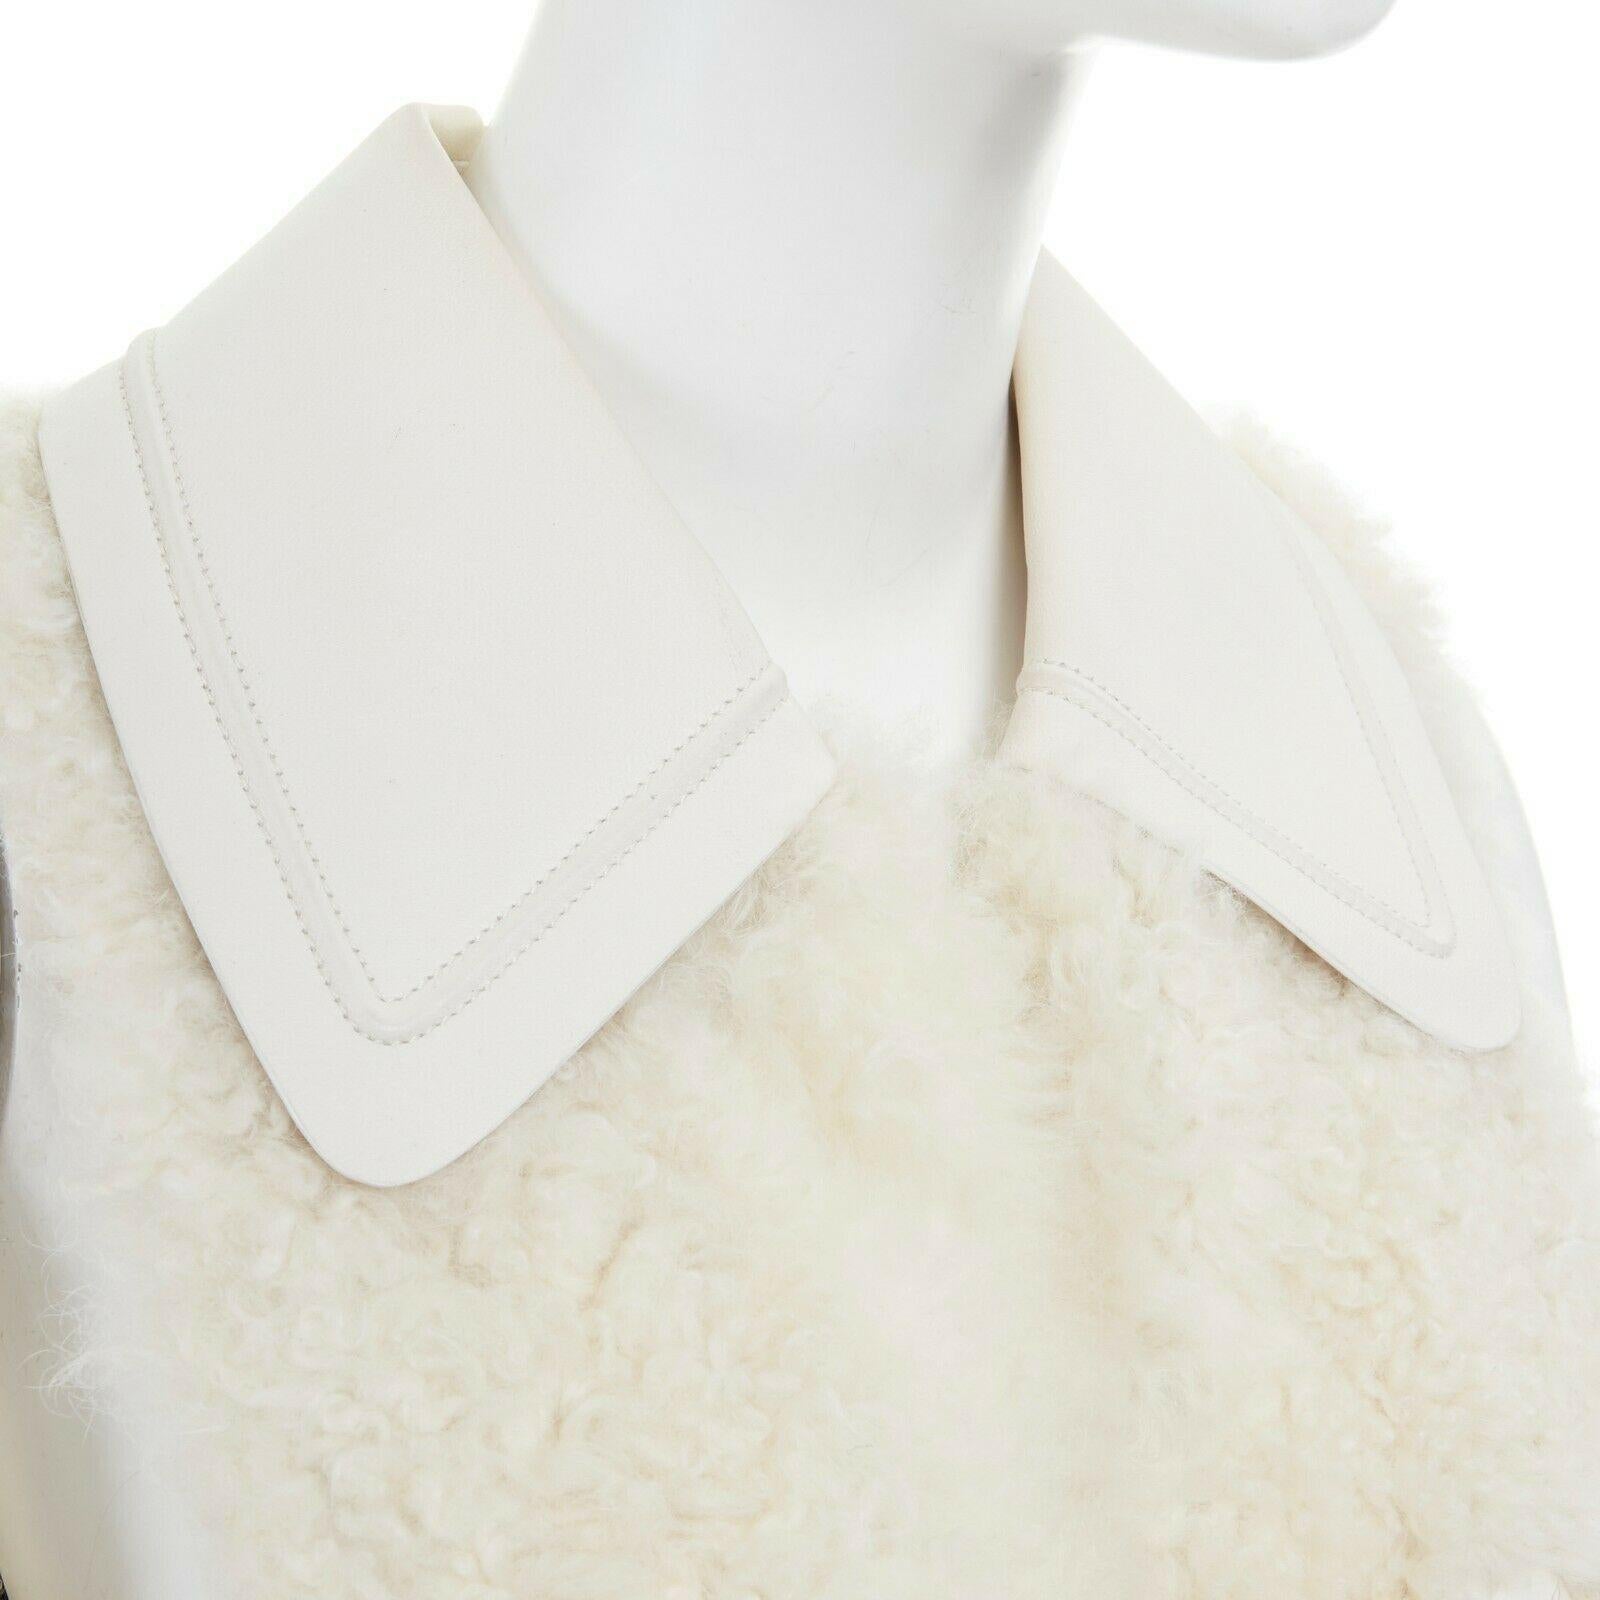 runway FENDI shearling fur white leather collar patch pocket vest jacket IT40 S
FENDI
FROM THE FALL WINTER 2015 COLLECTION
Genuine shearling fur outer. 
White leather collar and pocket. 
Wide spread collar. 
Ivory large resin button and toggle